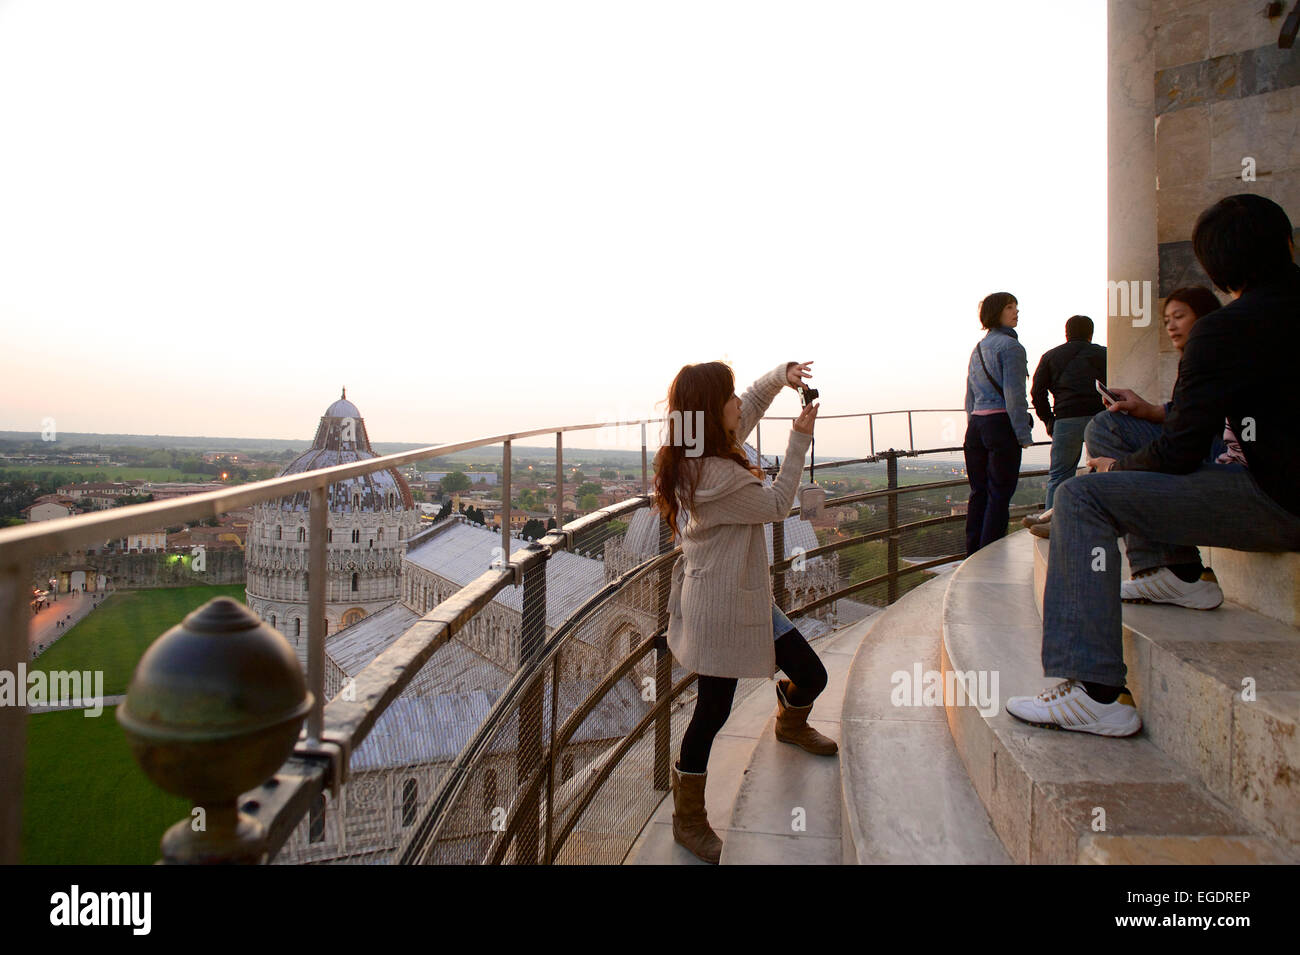 Tourists on the Leaning Tower of Pisa, Pisa, Tuscany, Italy Stock Photo